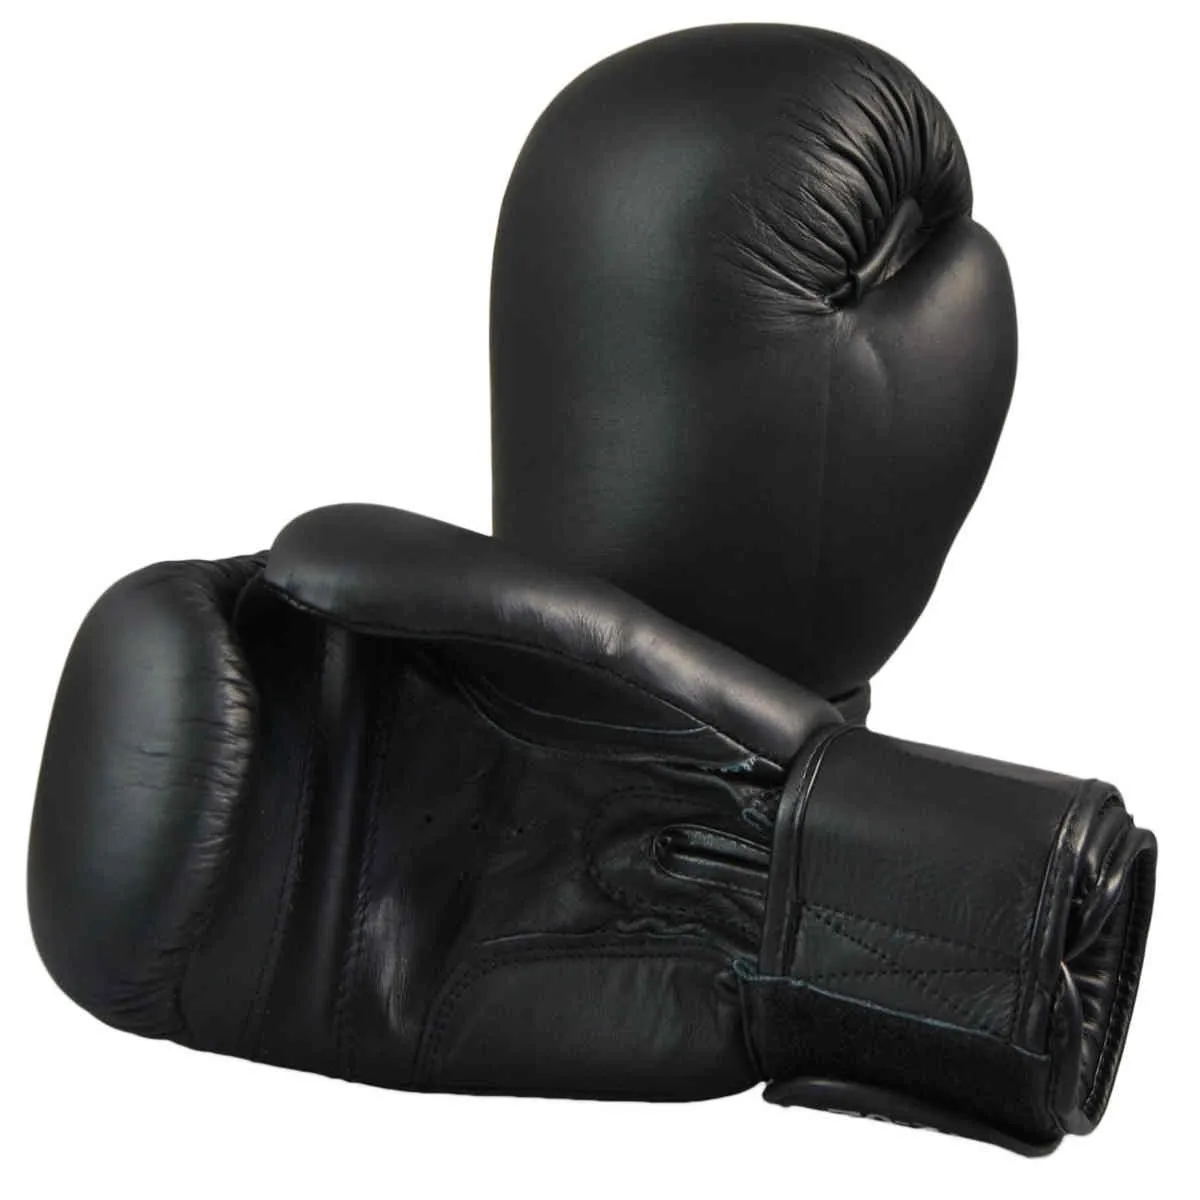 Boxing gloves leather black